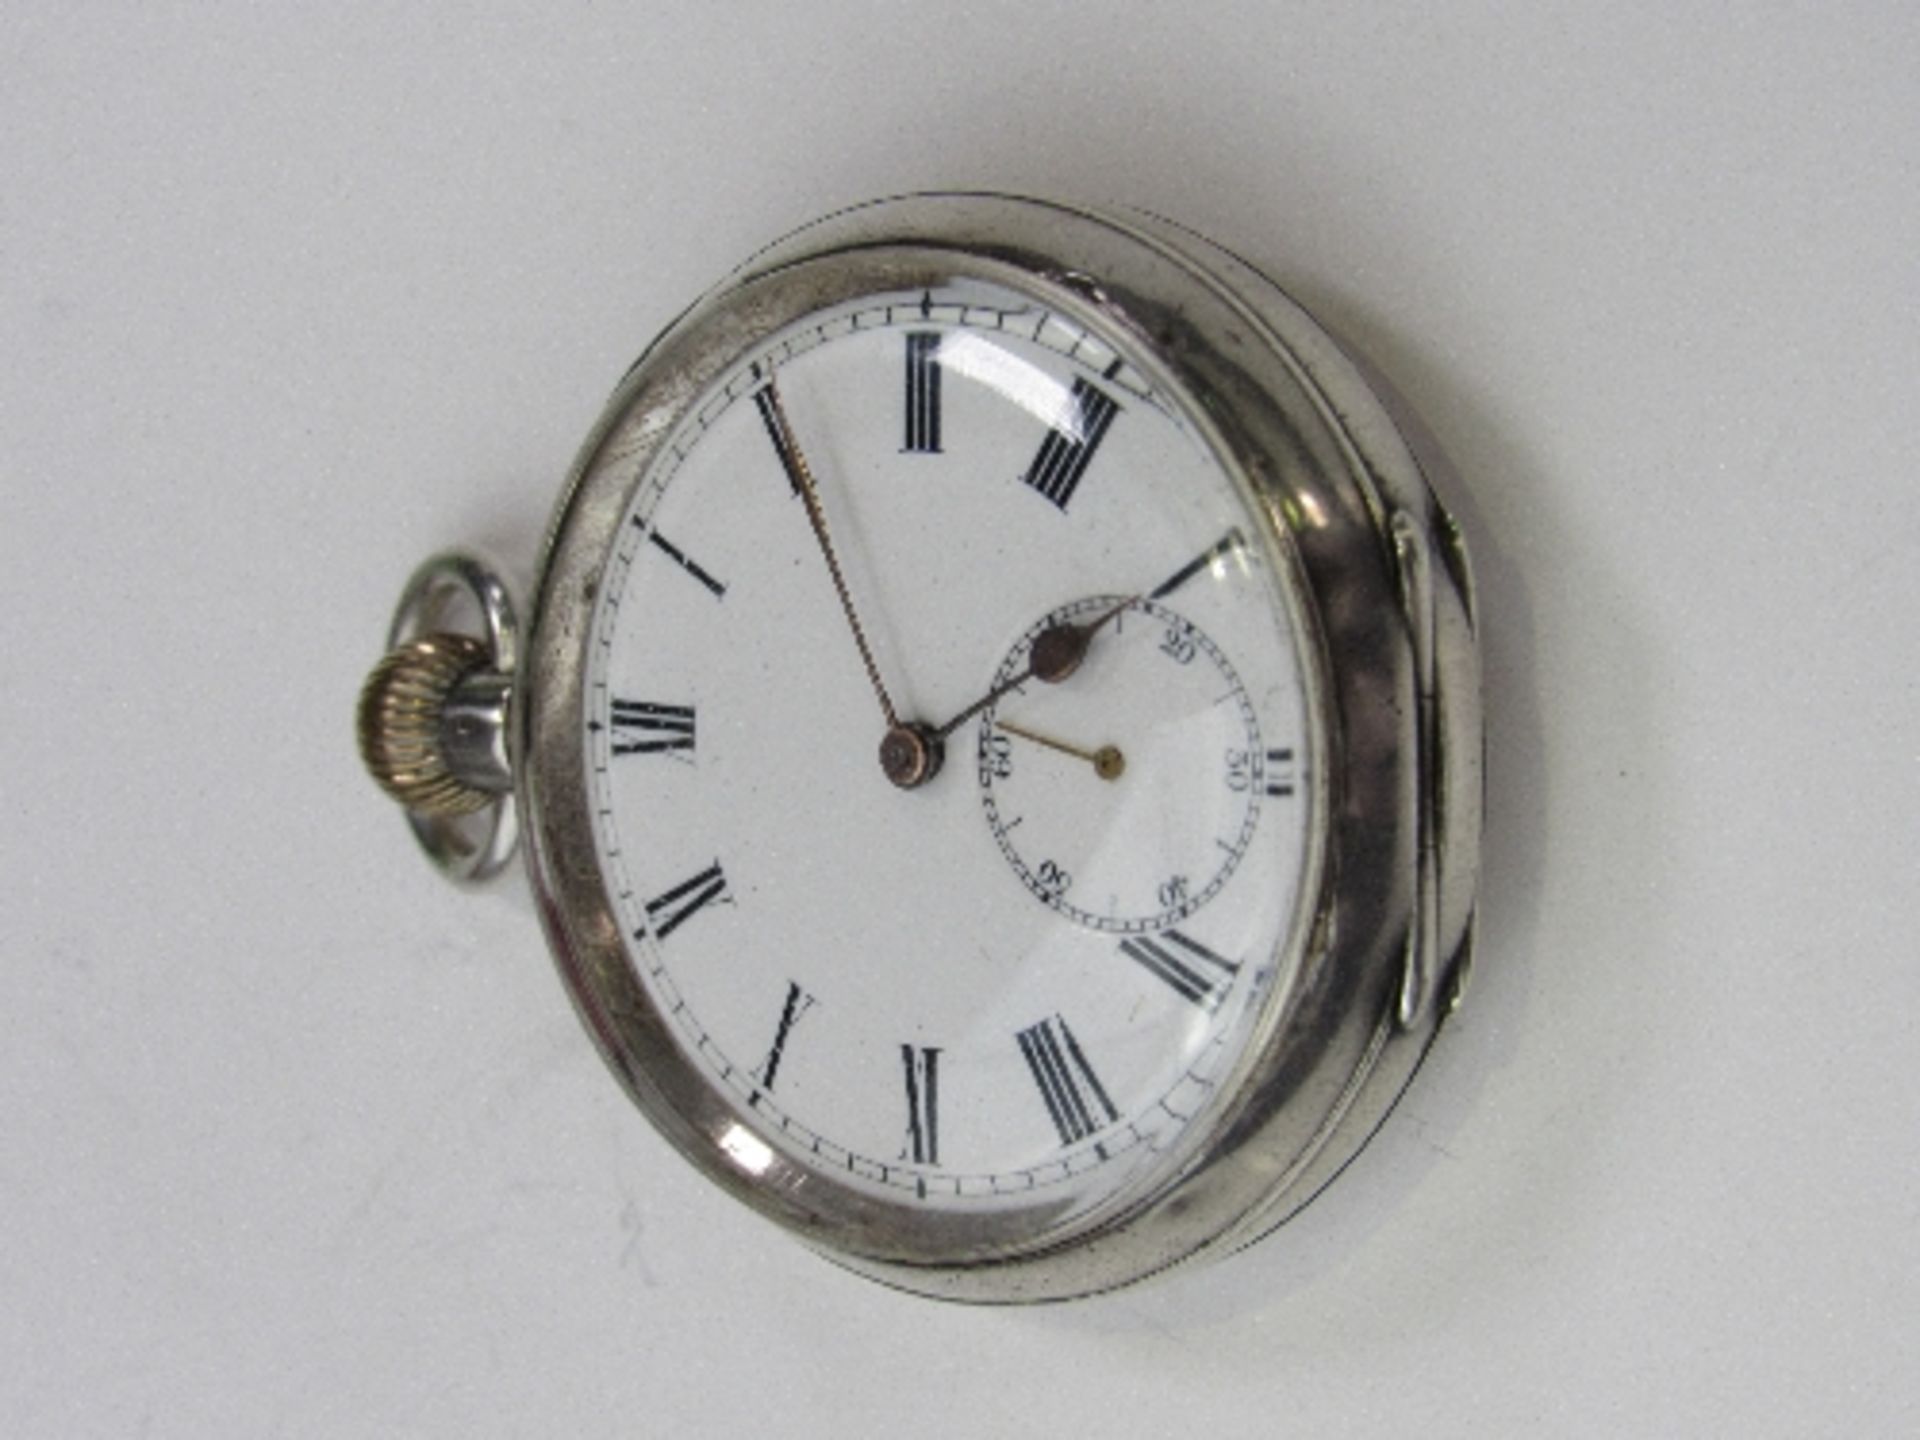 935 silver Swiss made pocket watch with white face & Roman numerals. Estimate £35-50. - Image 5 of 5